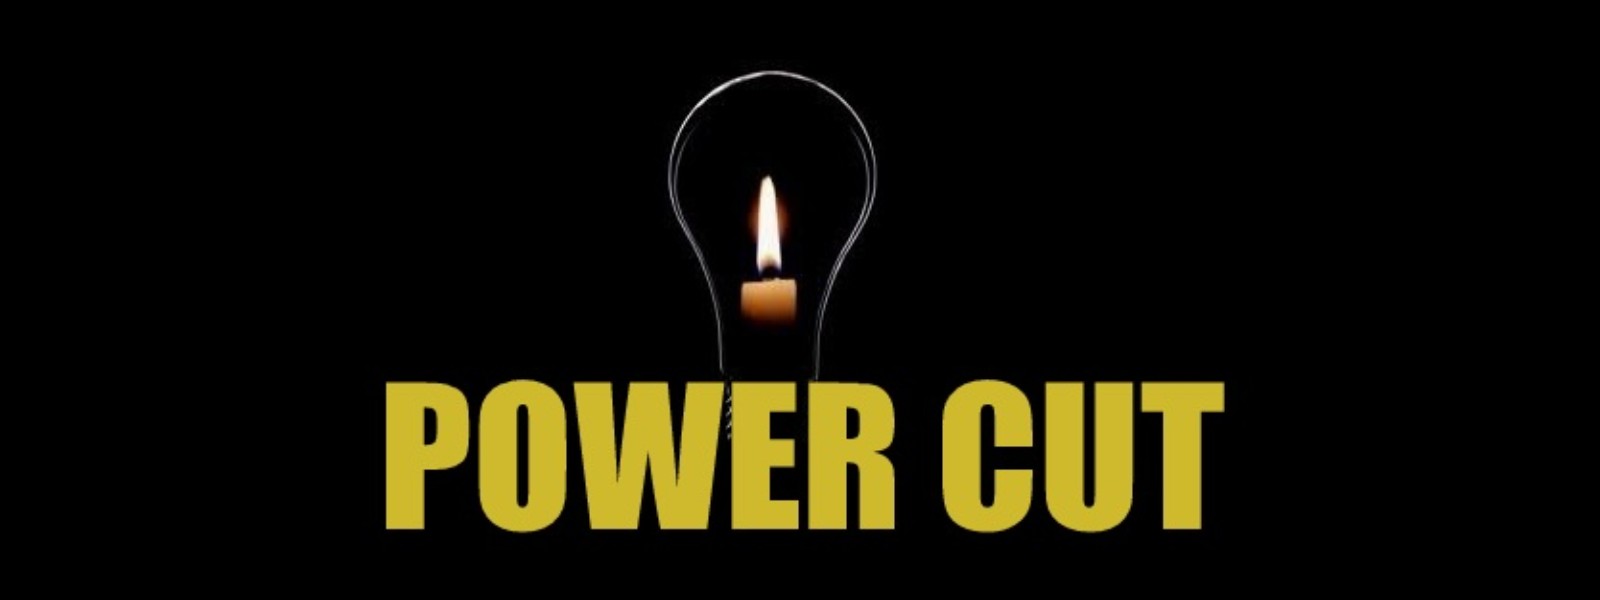 Power cuts approved for 25th August